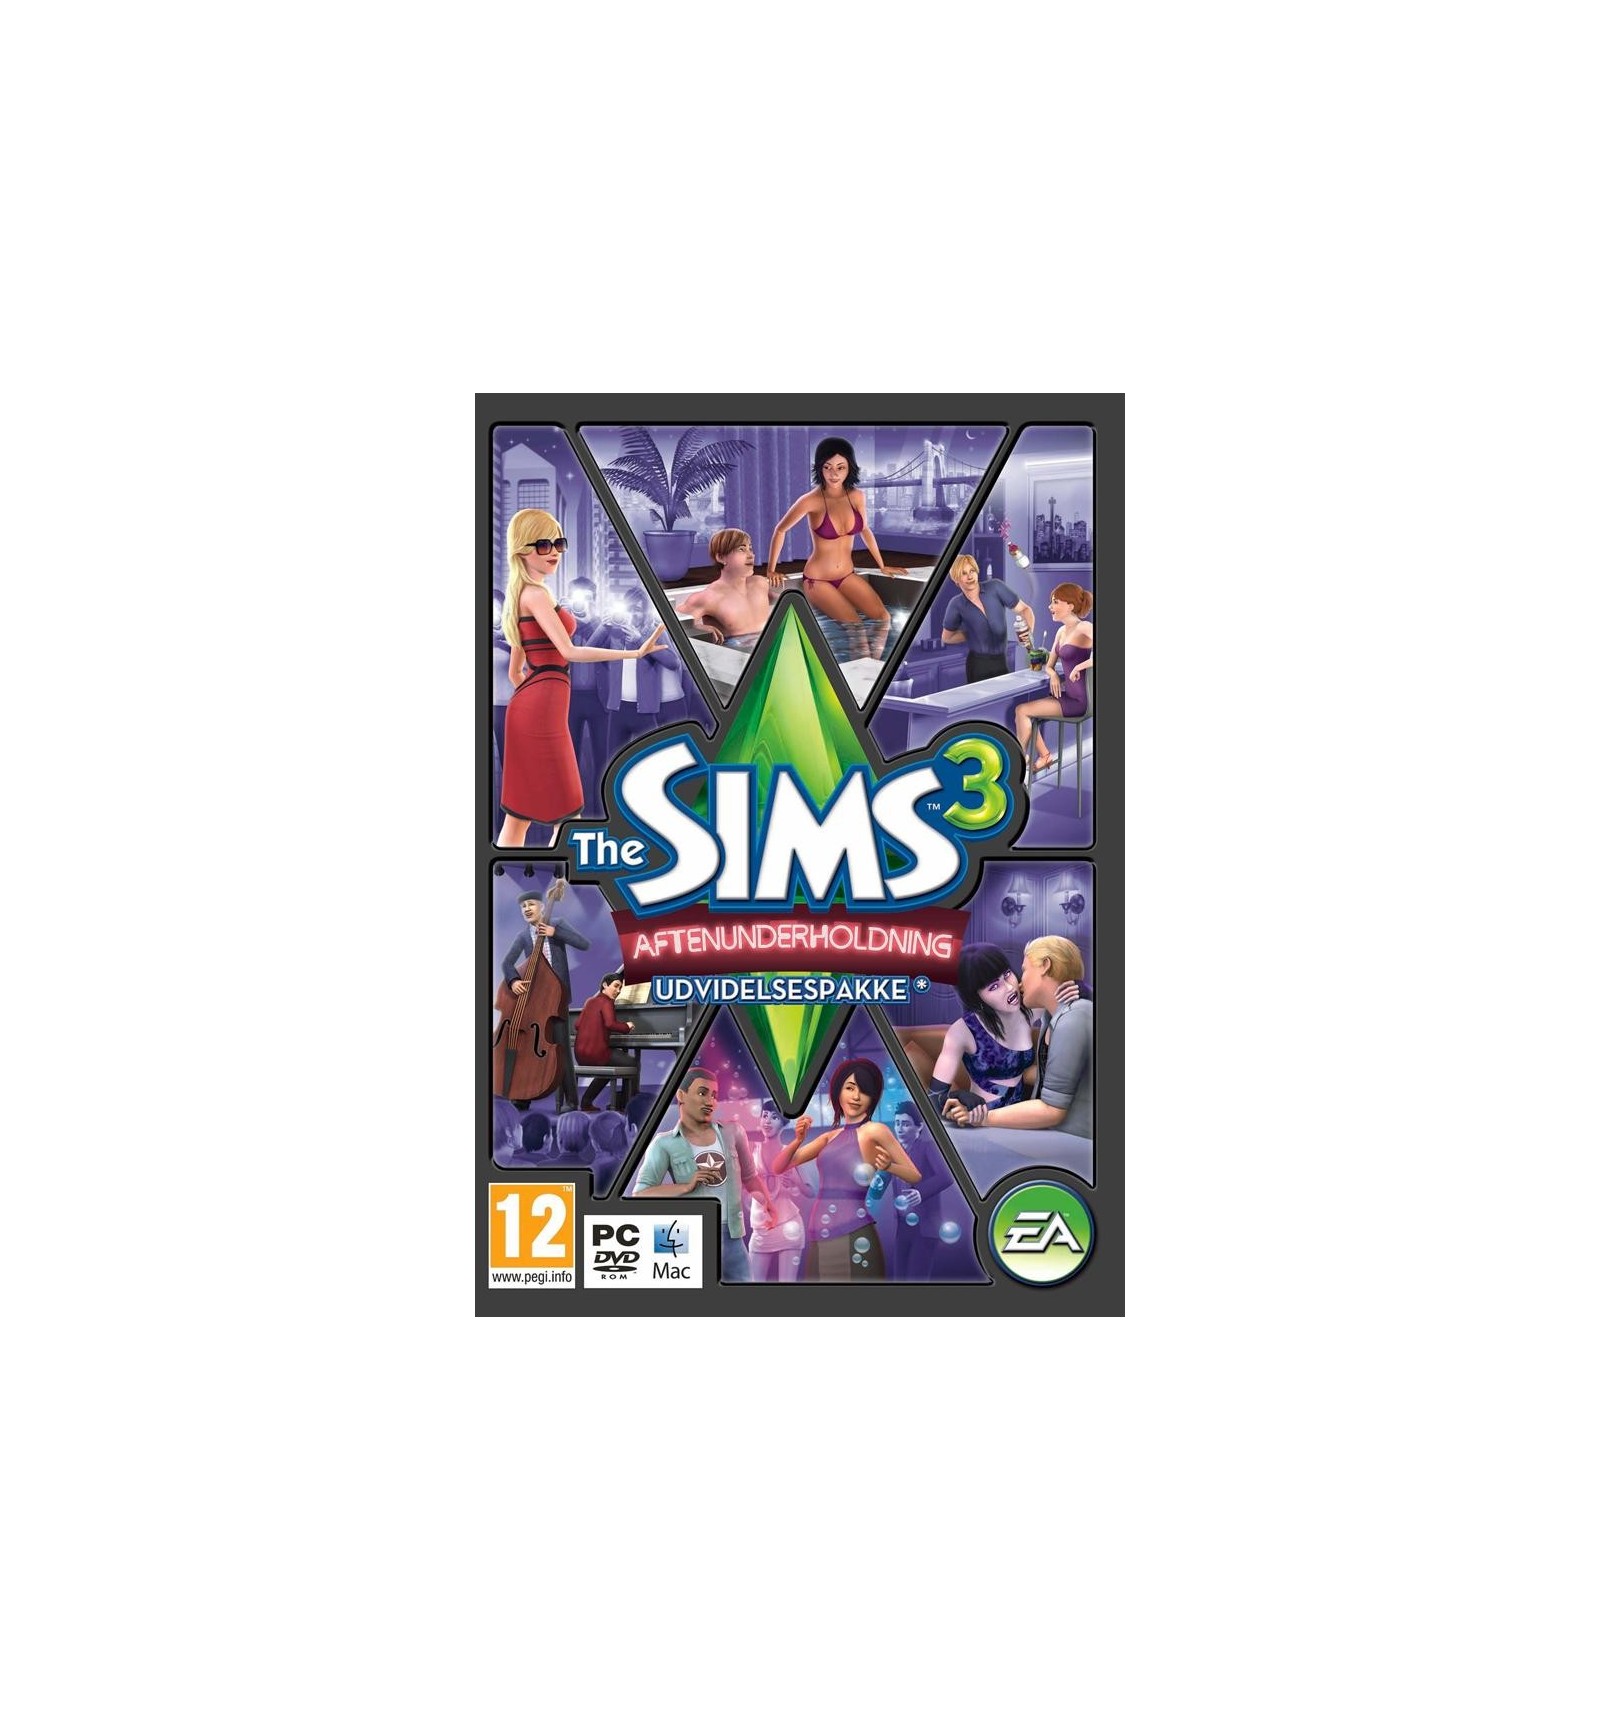 The sims 3 late night download free full version pc game